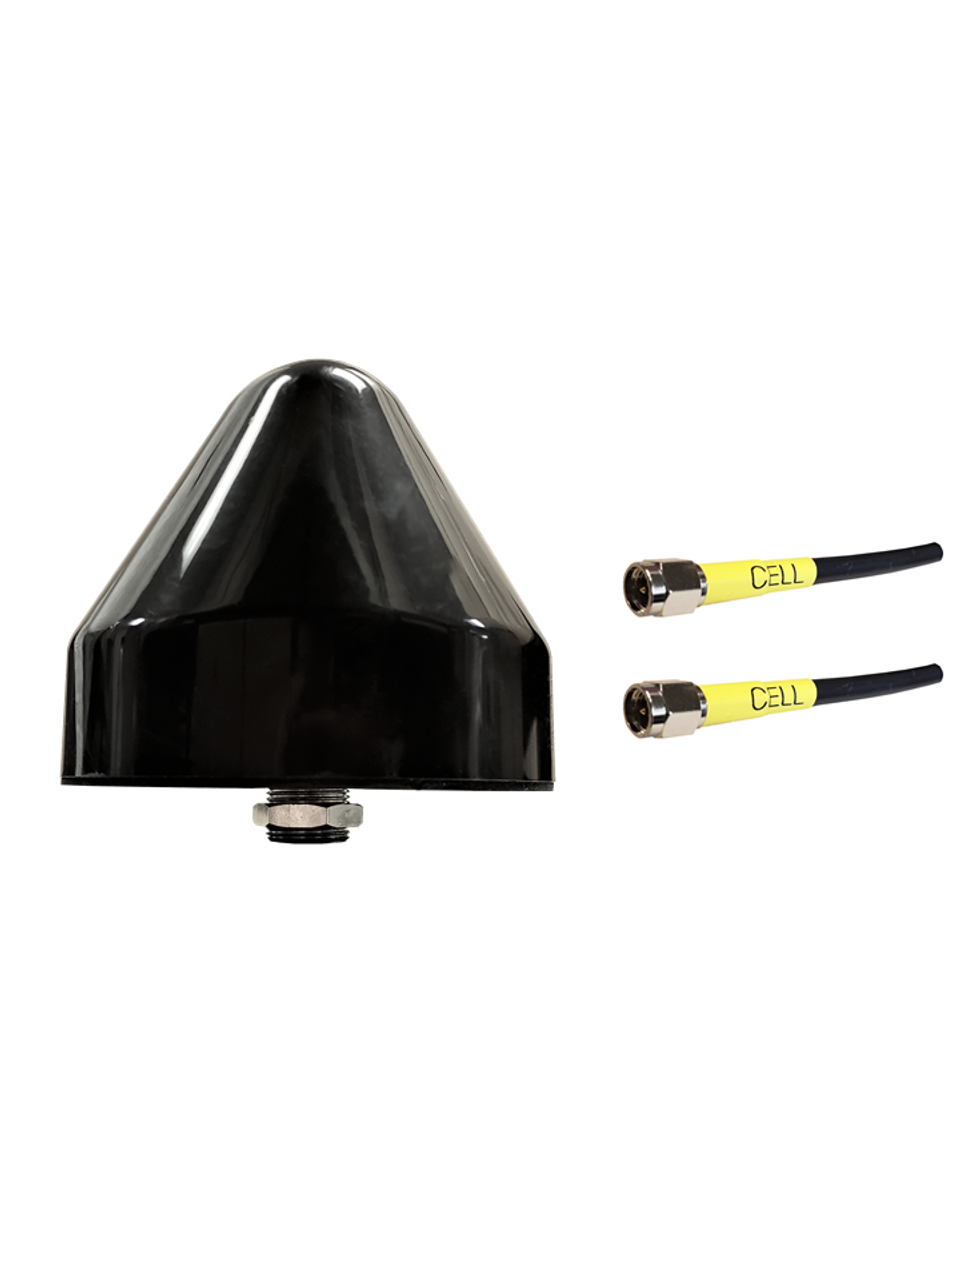 M500 2-Lead MIMO 3G 4G LTE Bolt Mount M2M IoT Antenna for Inseego SKYUS-DS Modem